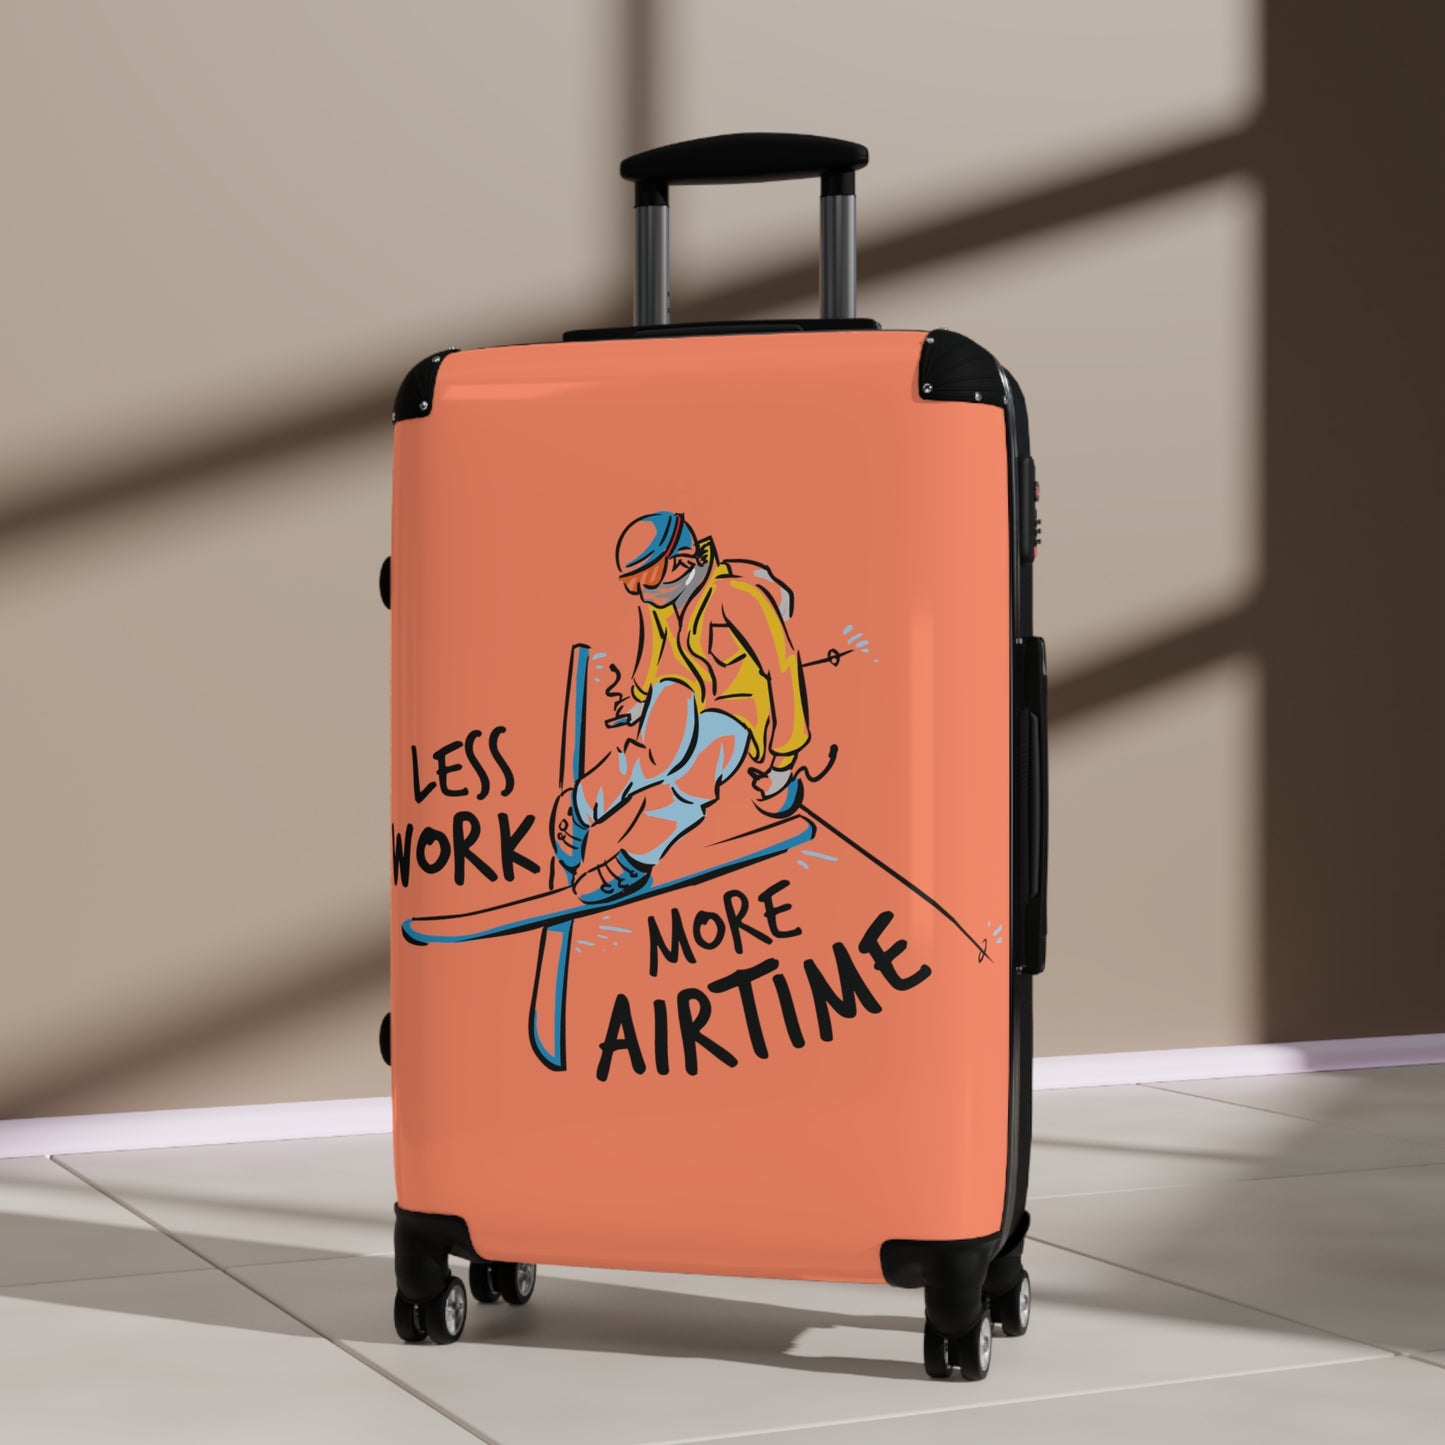 Less Work More Airtime Custom Luggage